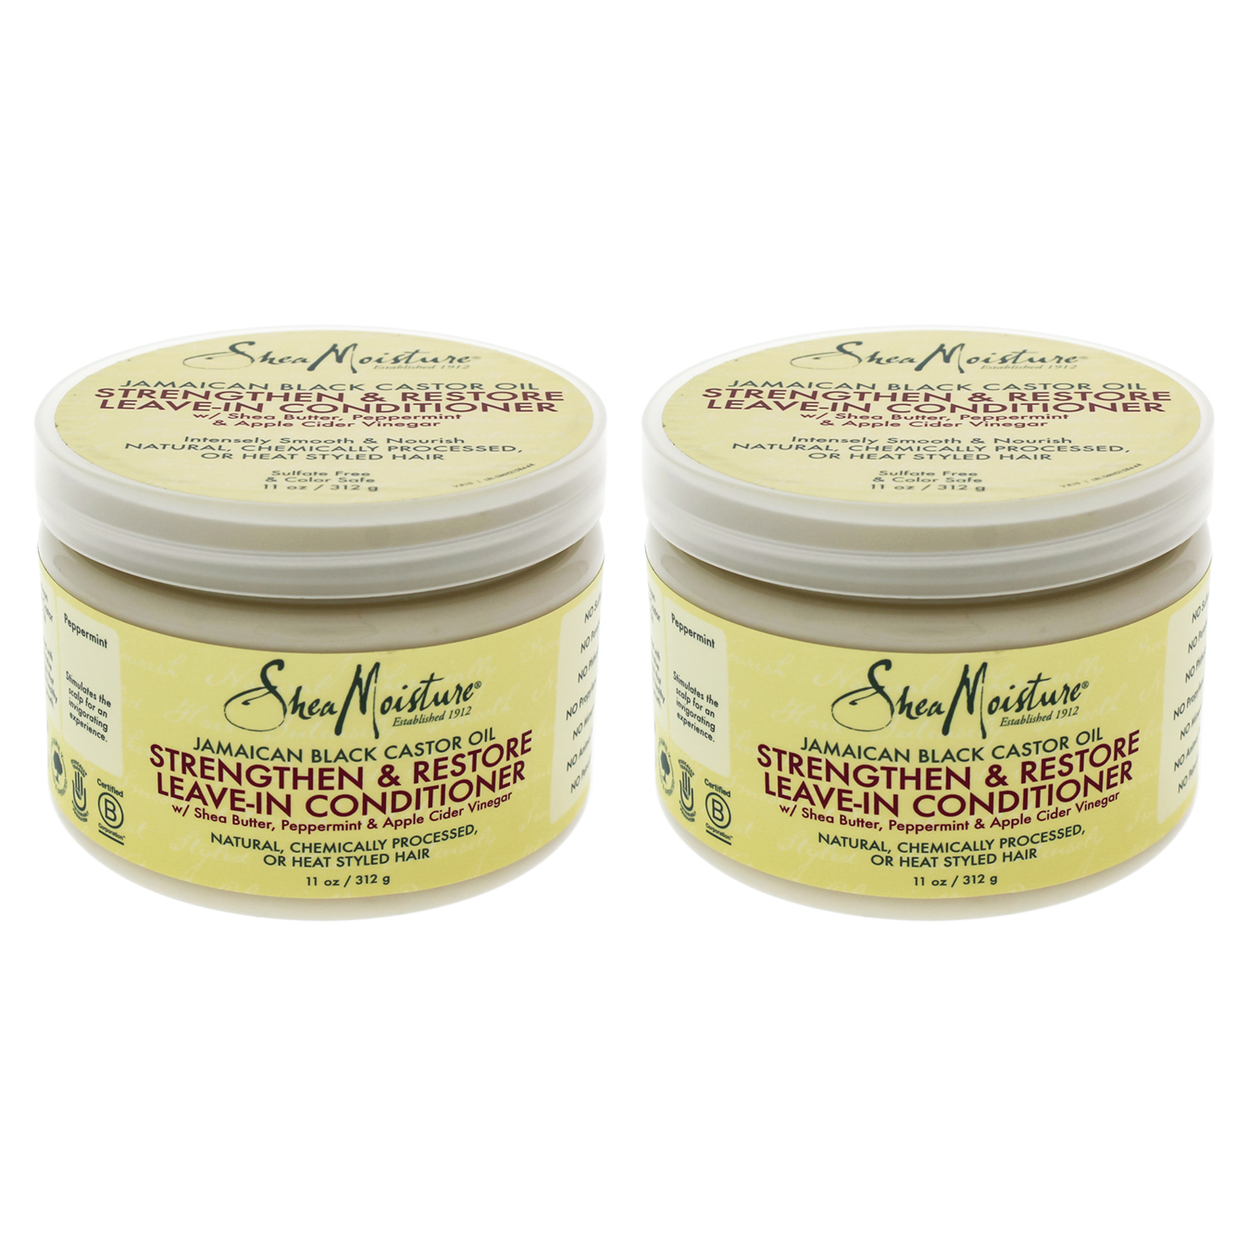 Shea Moisture Jamaican Black Castor Oil Strengthen & Grow Leave-In Conditioner - Pack Of 2 Conditioner 11 Oz